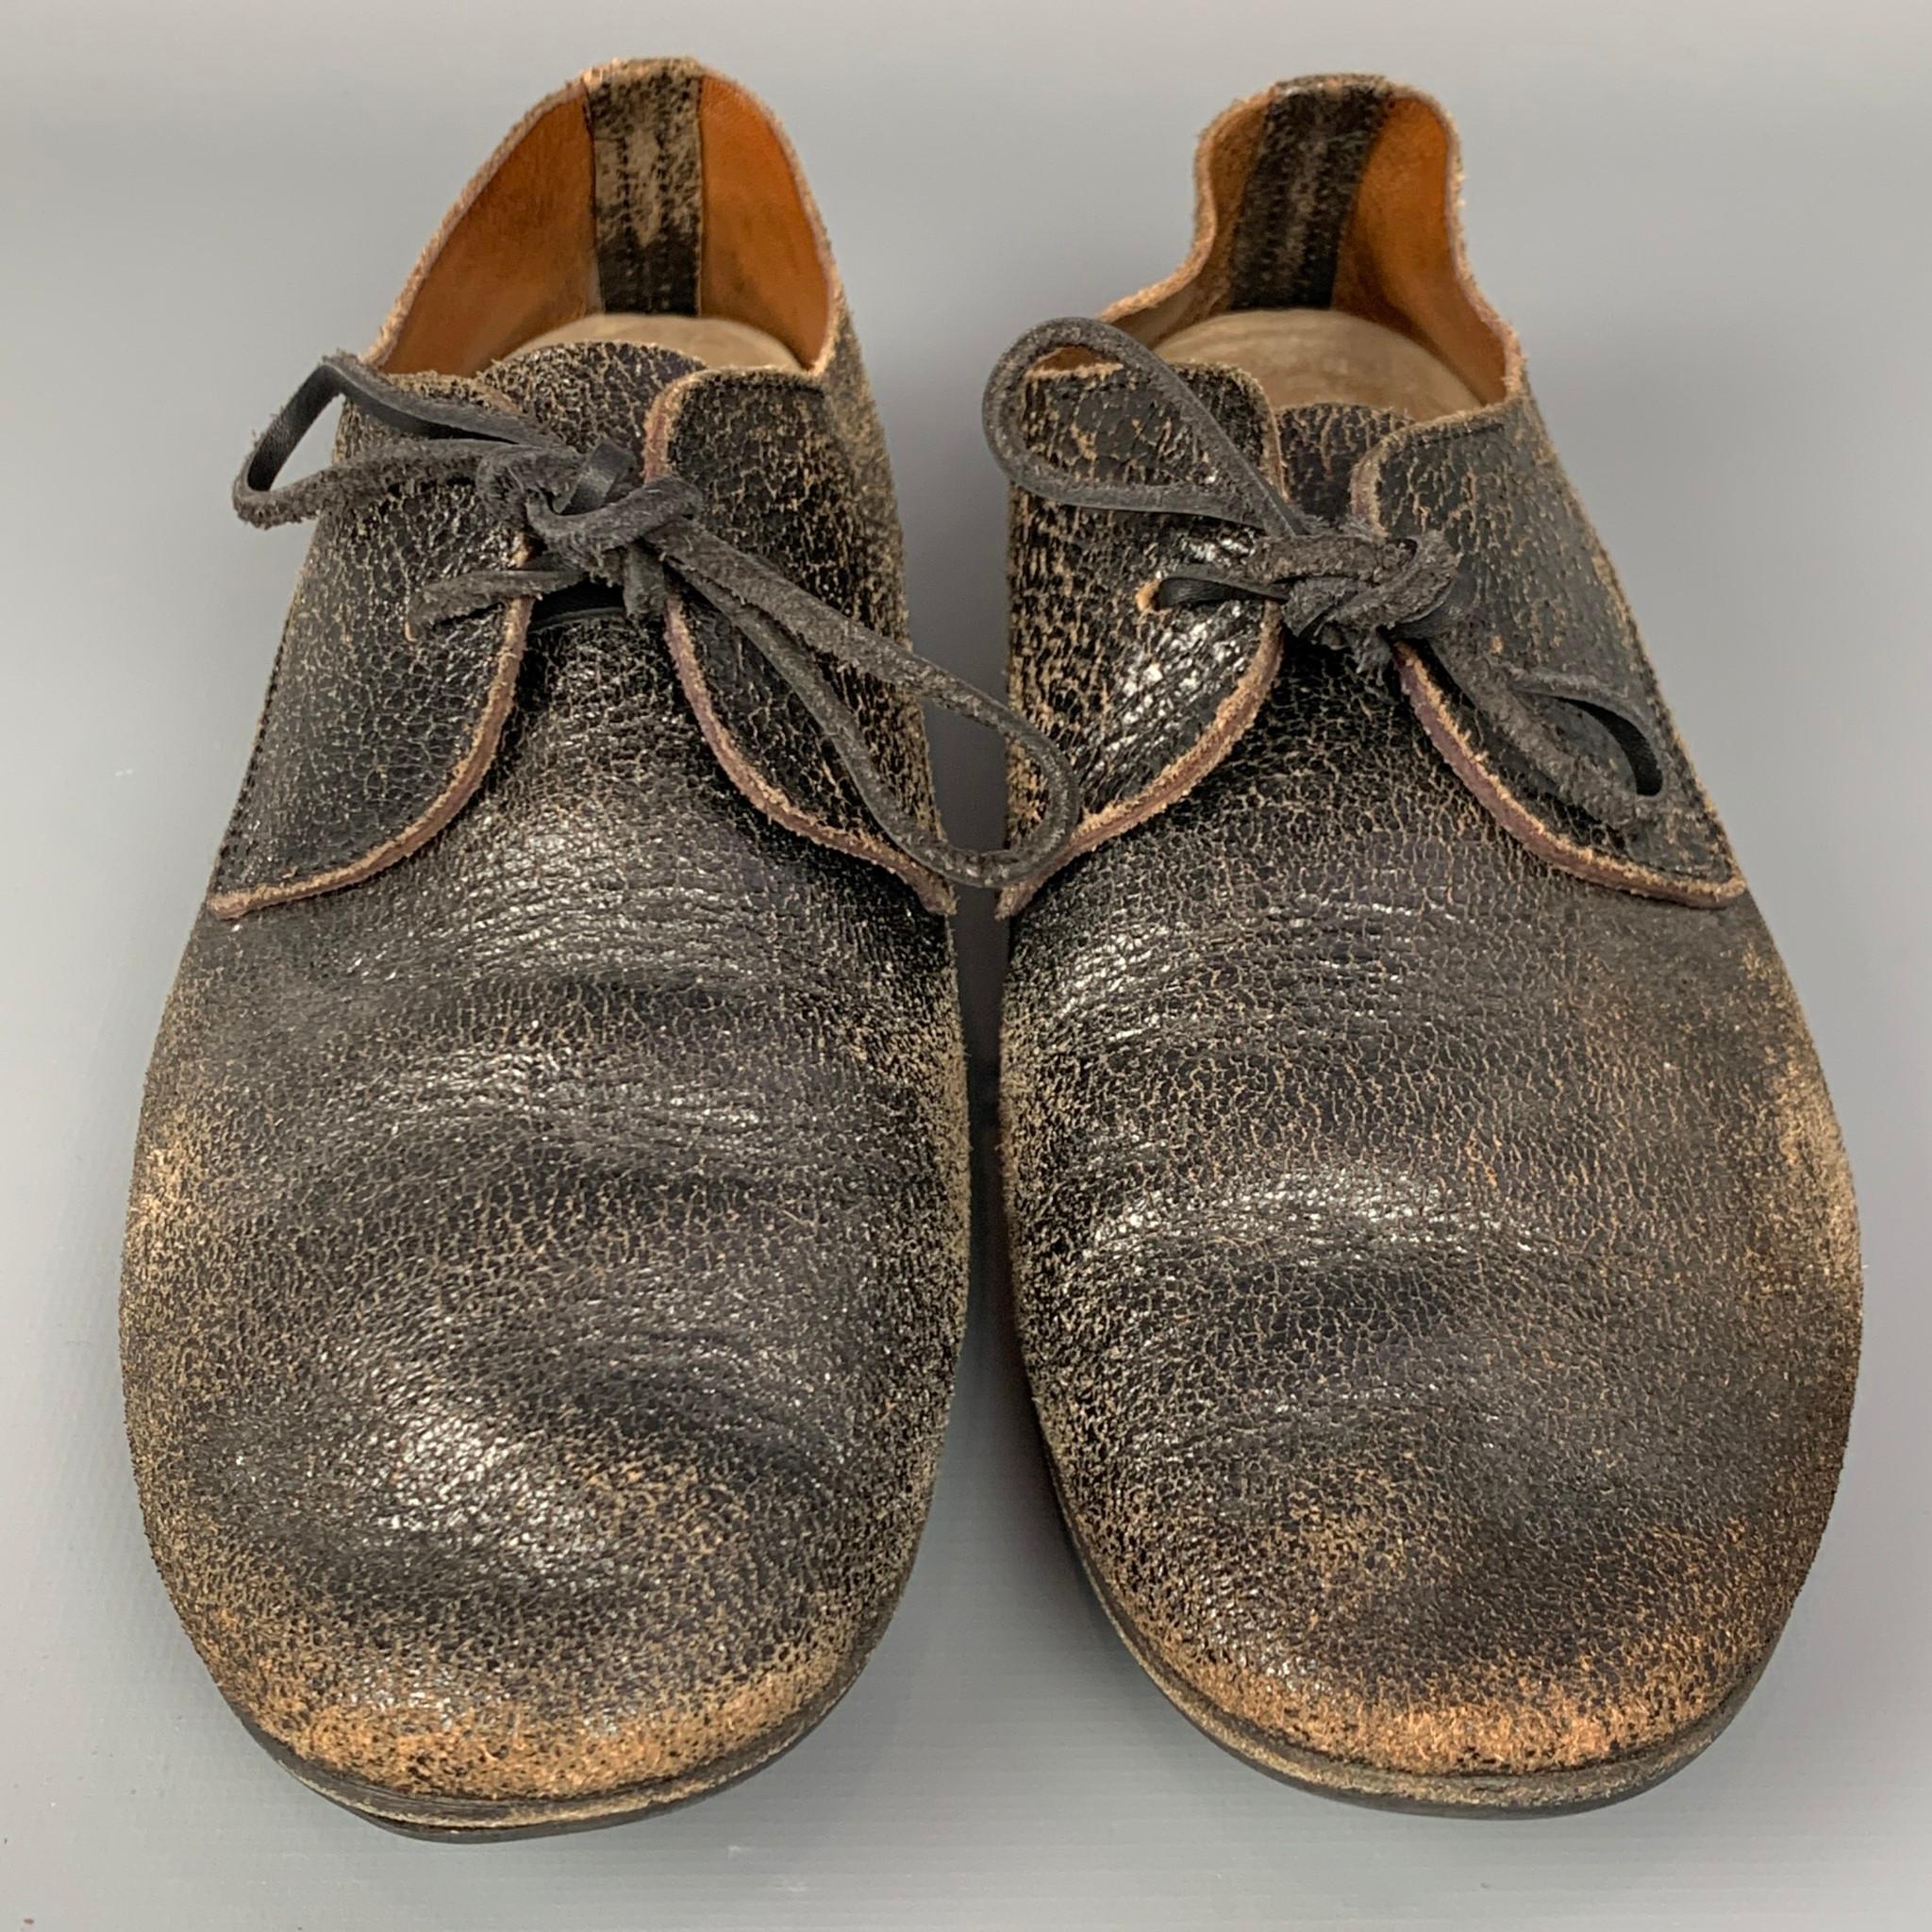 cracked leather shoes